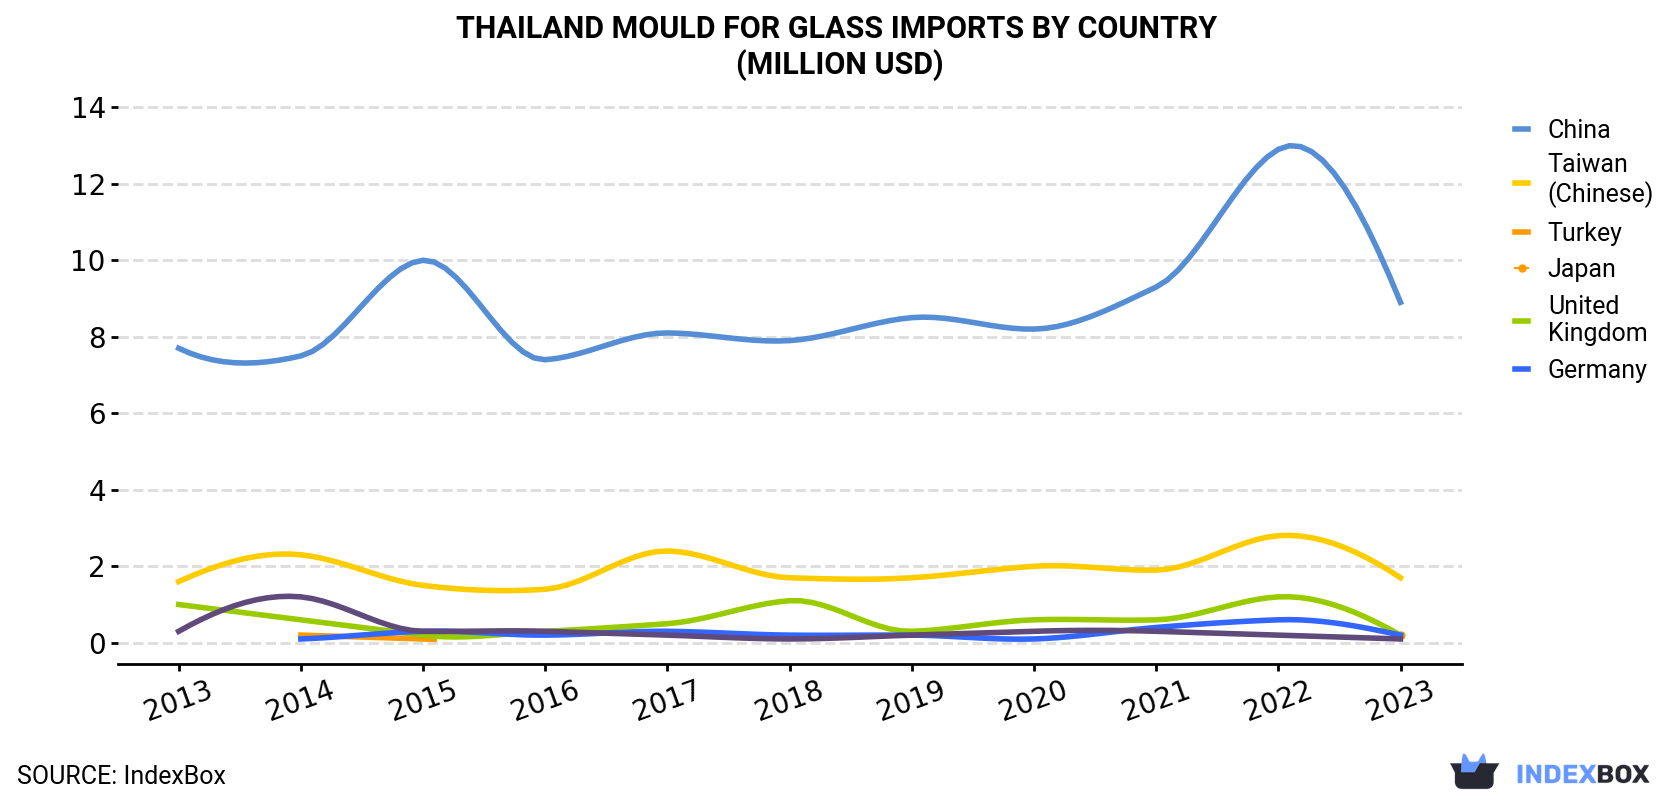 Thailand Mould For Glass Imports By Country (Million USD)